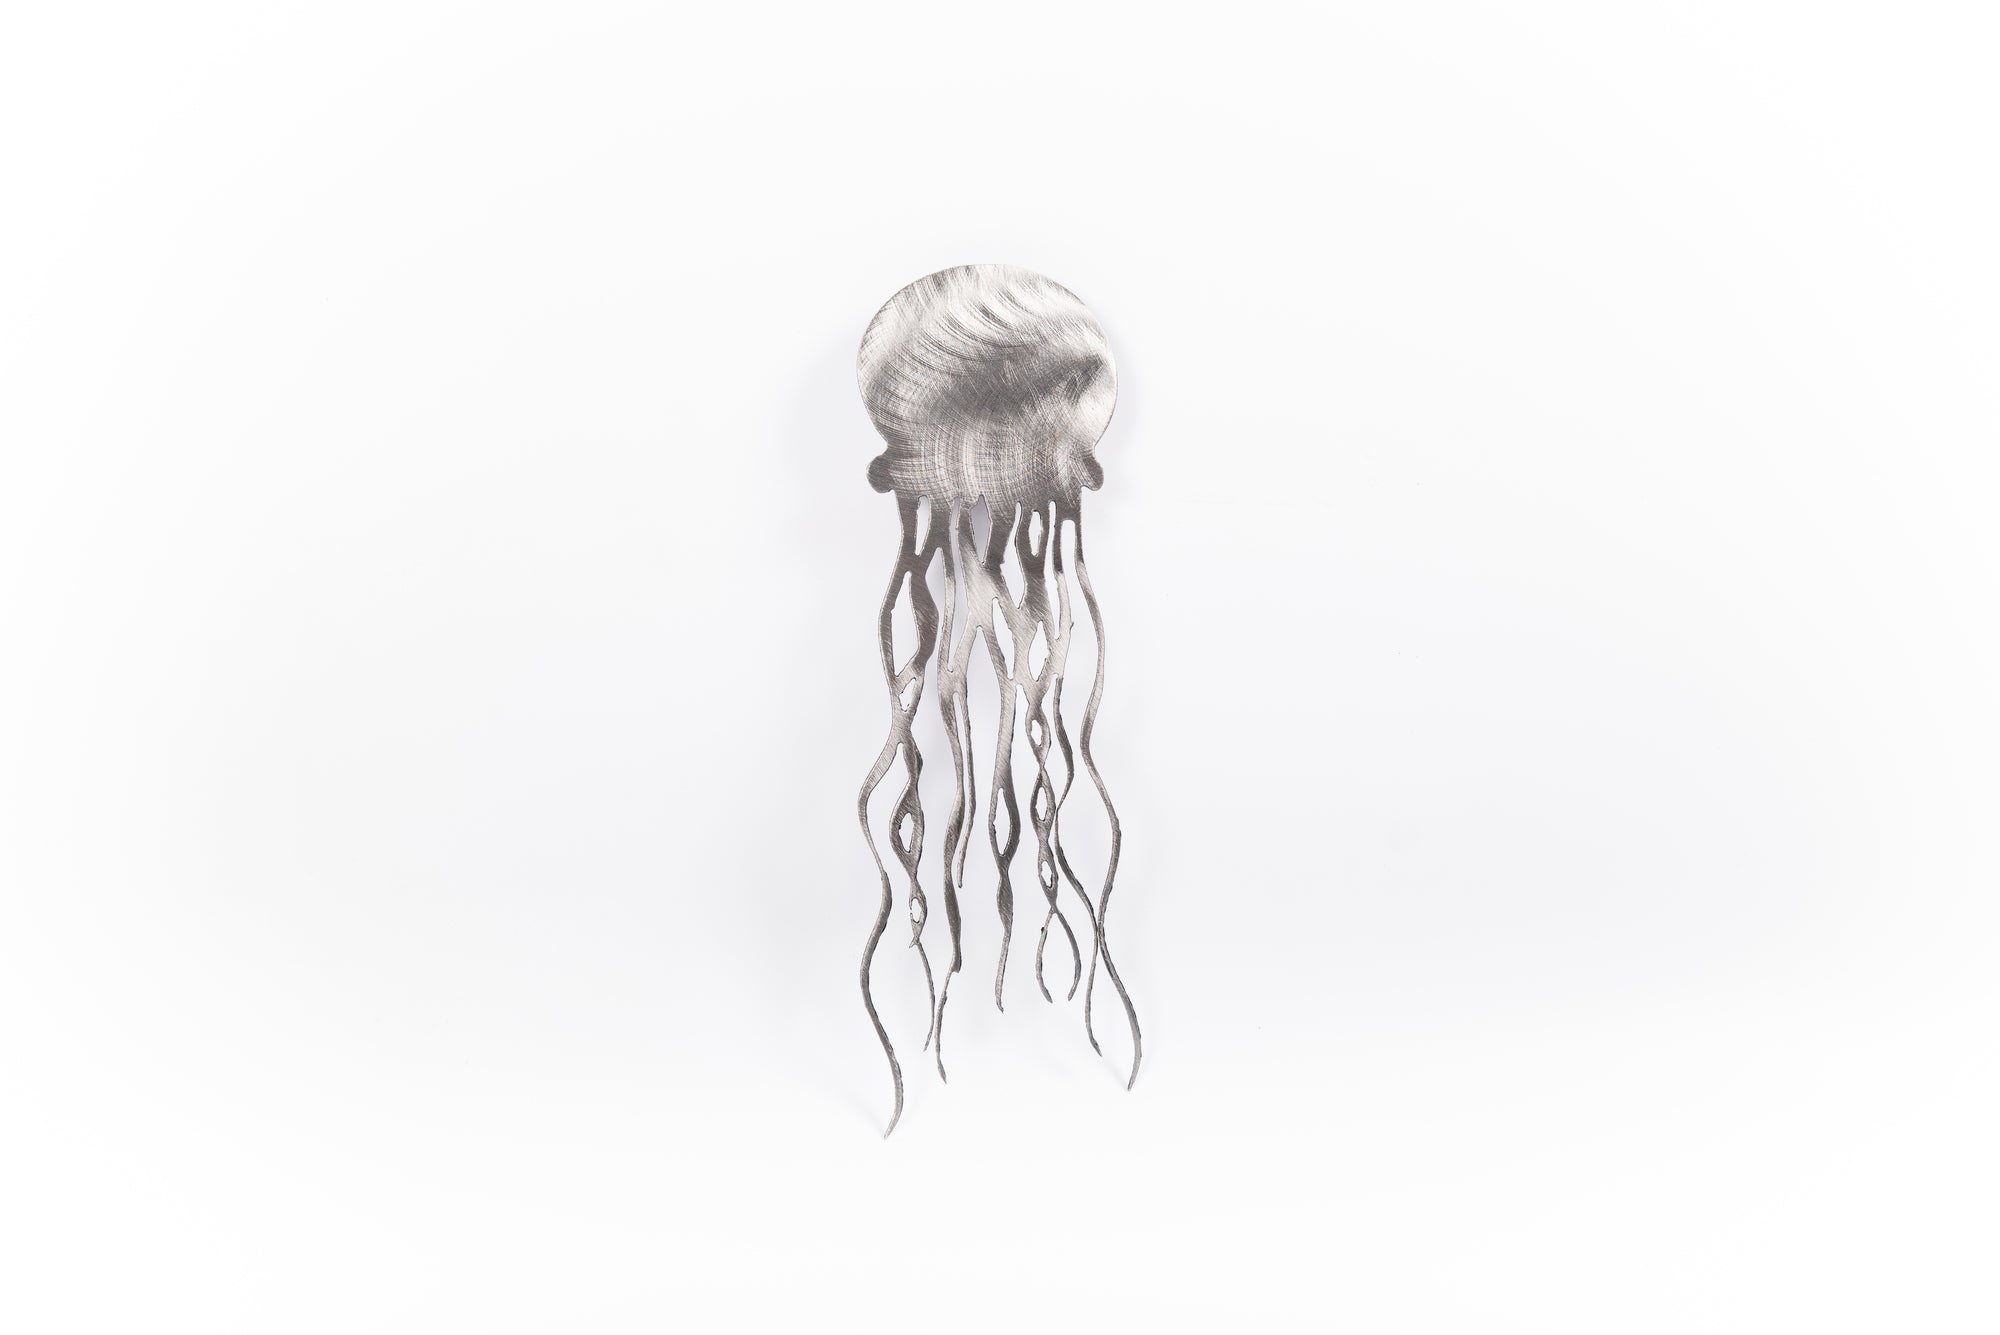 JACK WILLOUGHBY BLACK OR SILVER JELLYFISH